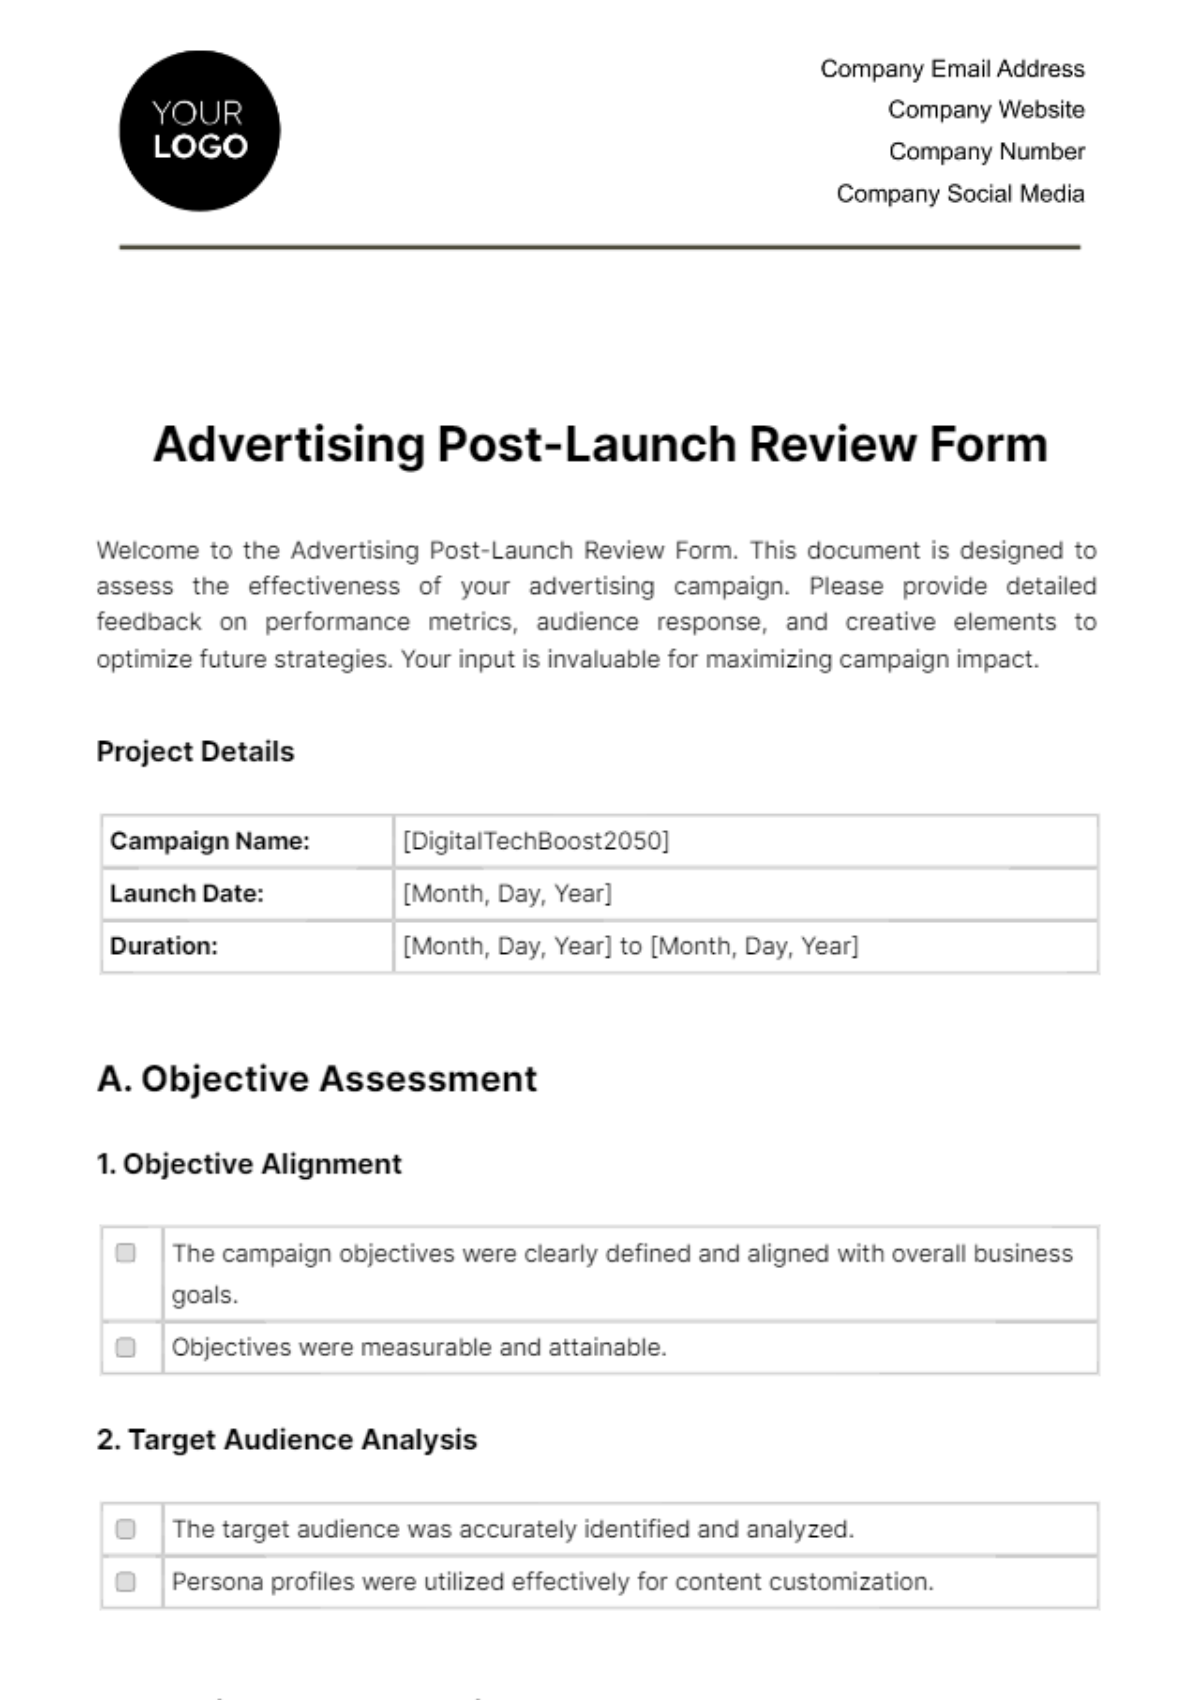 Advertising Post-Launch Review Form Template